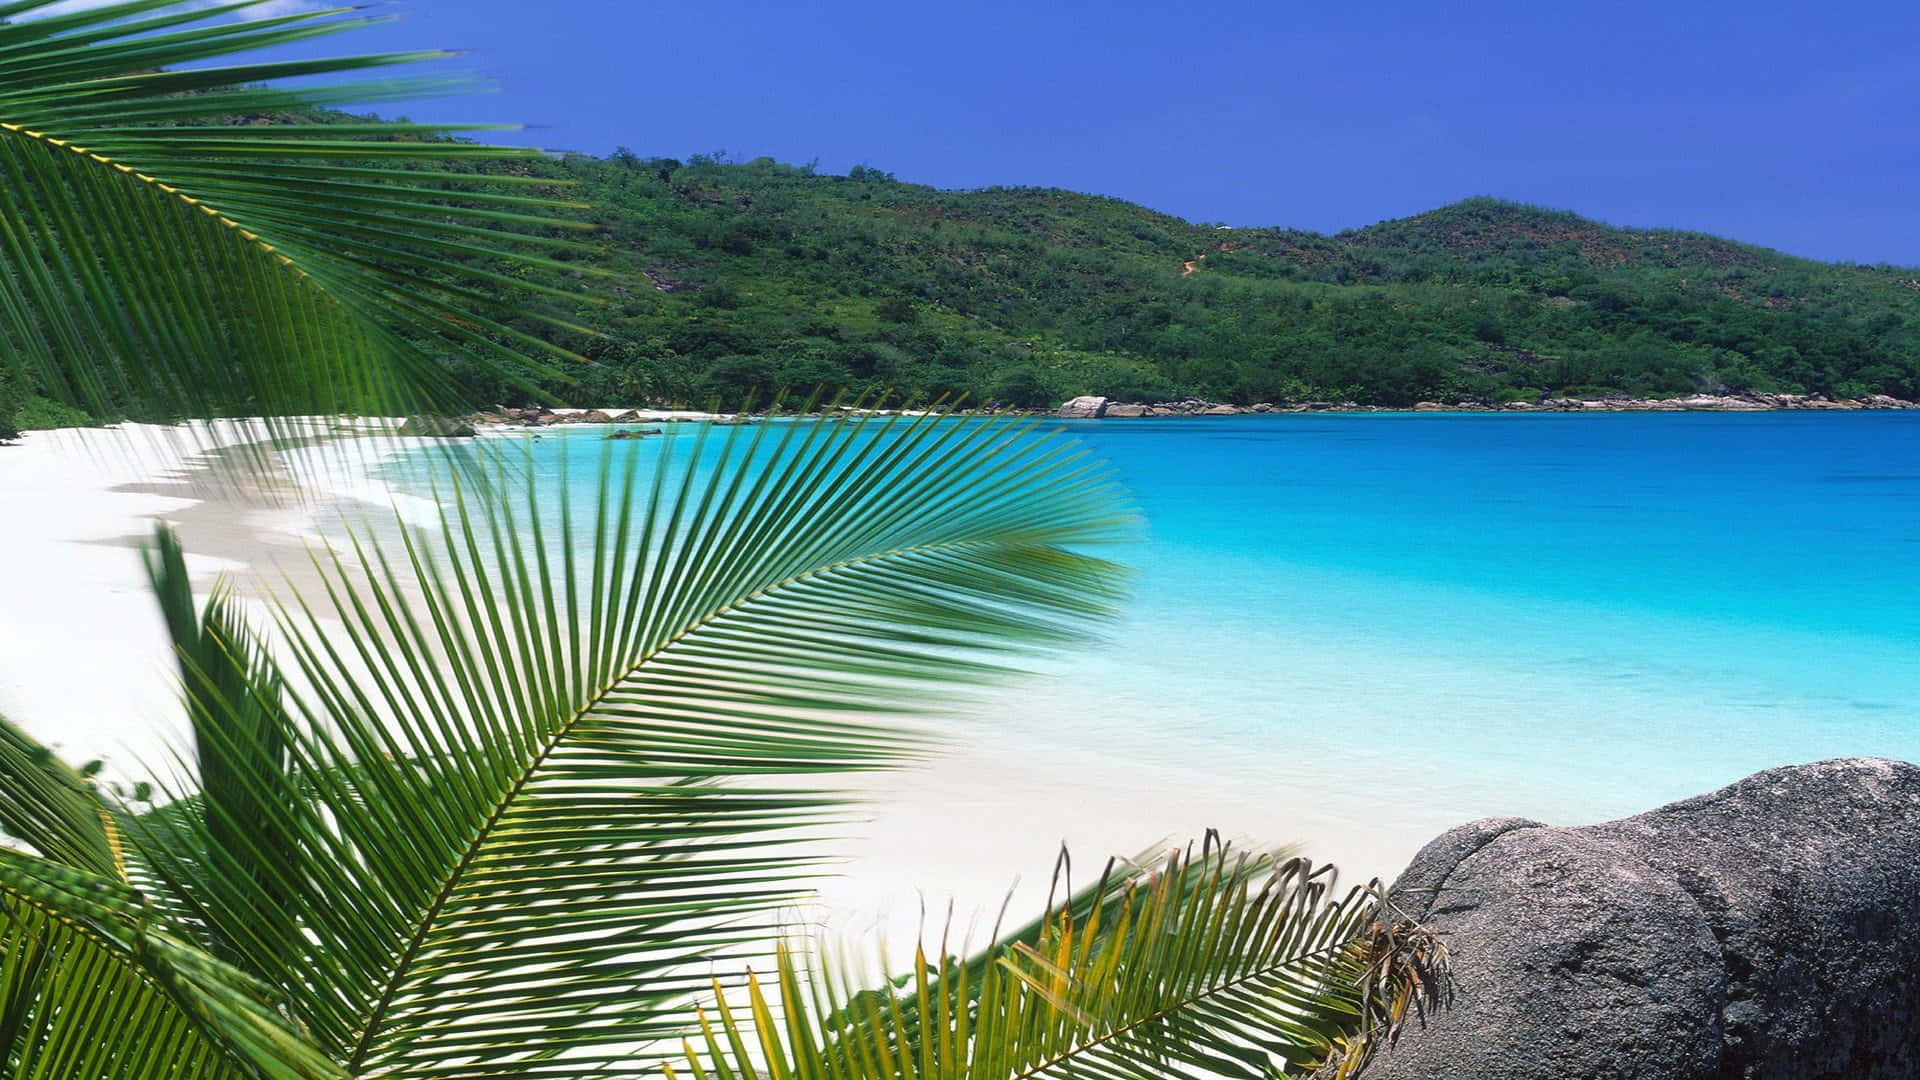 "Feel the stress melt away while taking in the tropical beauty of this high resolution beach."